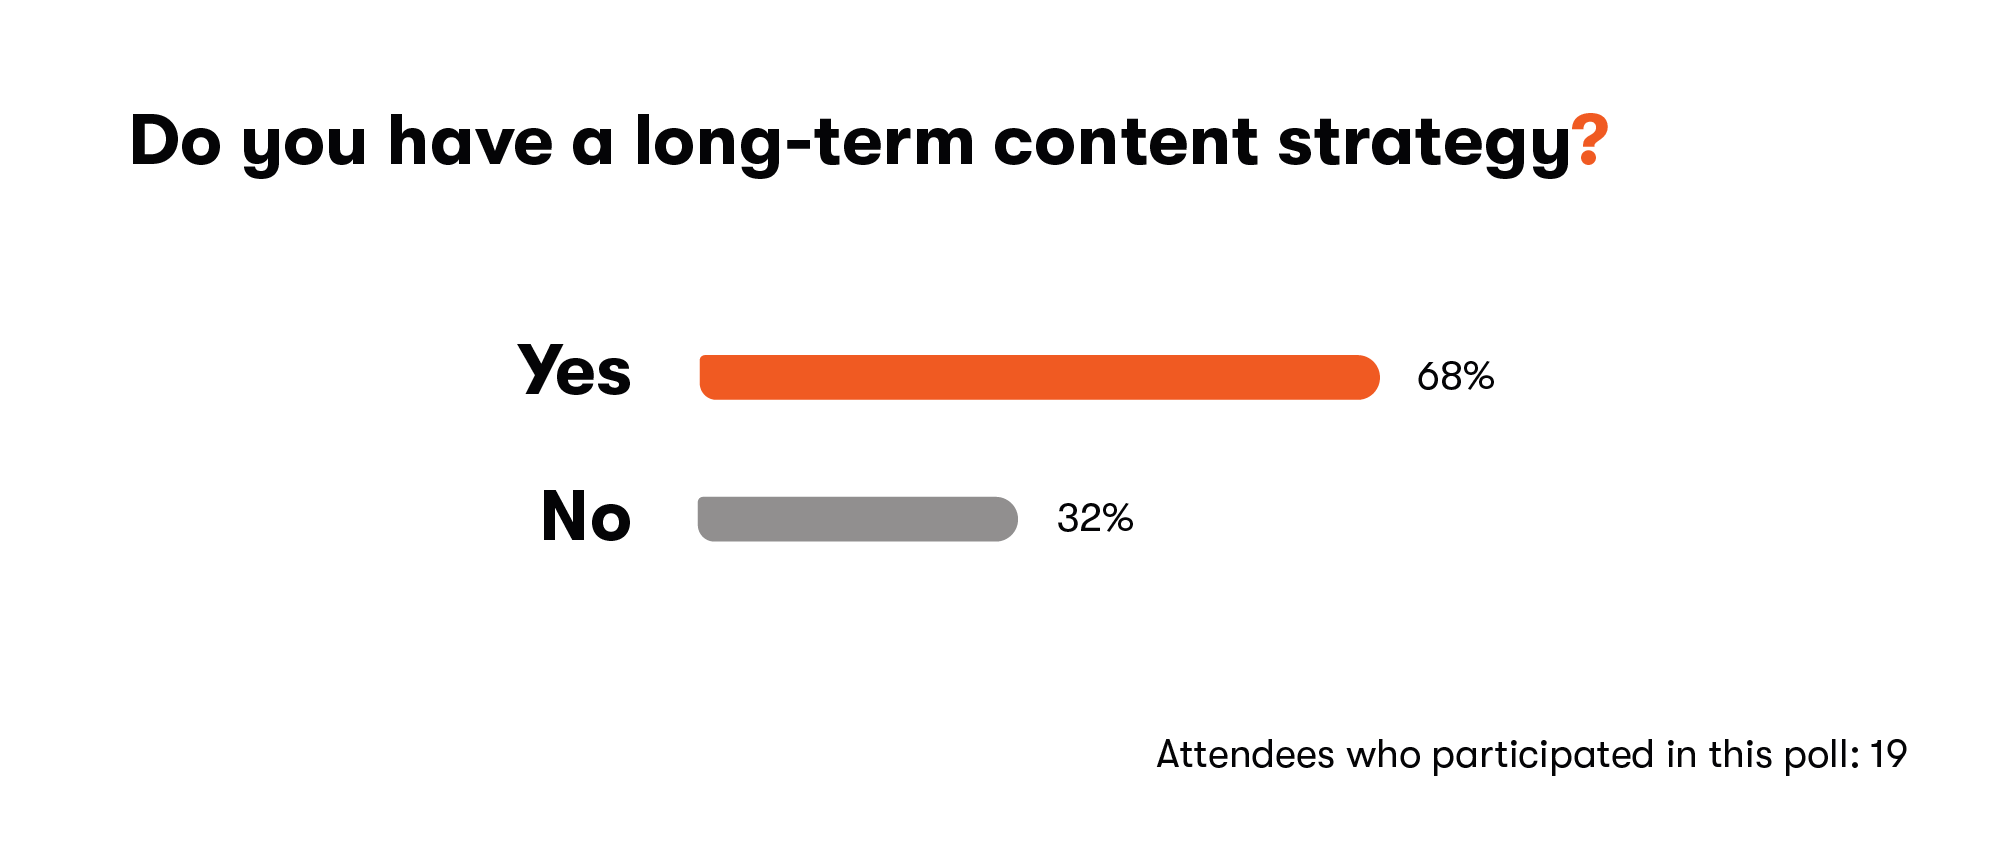 Do you have a long-term content strategy?